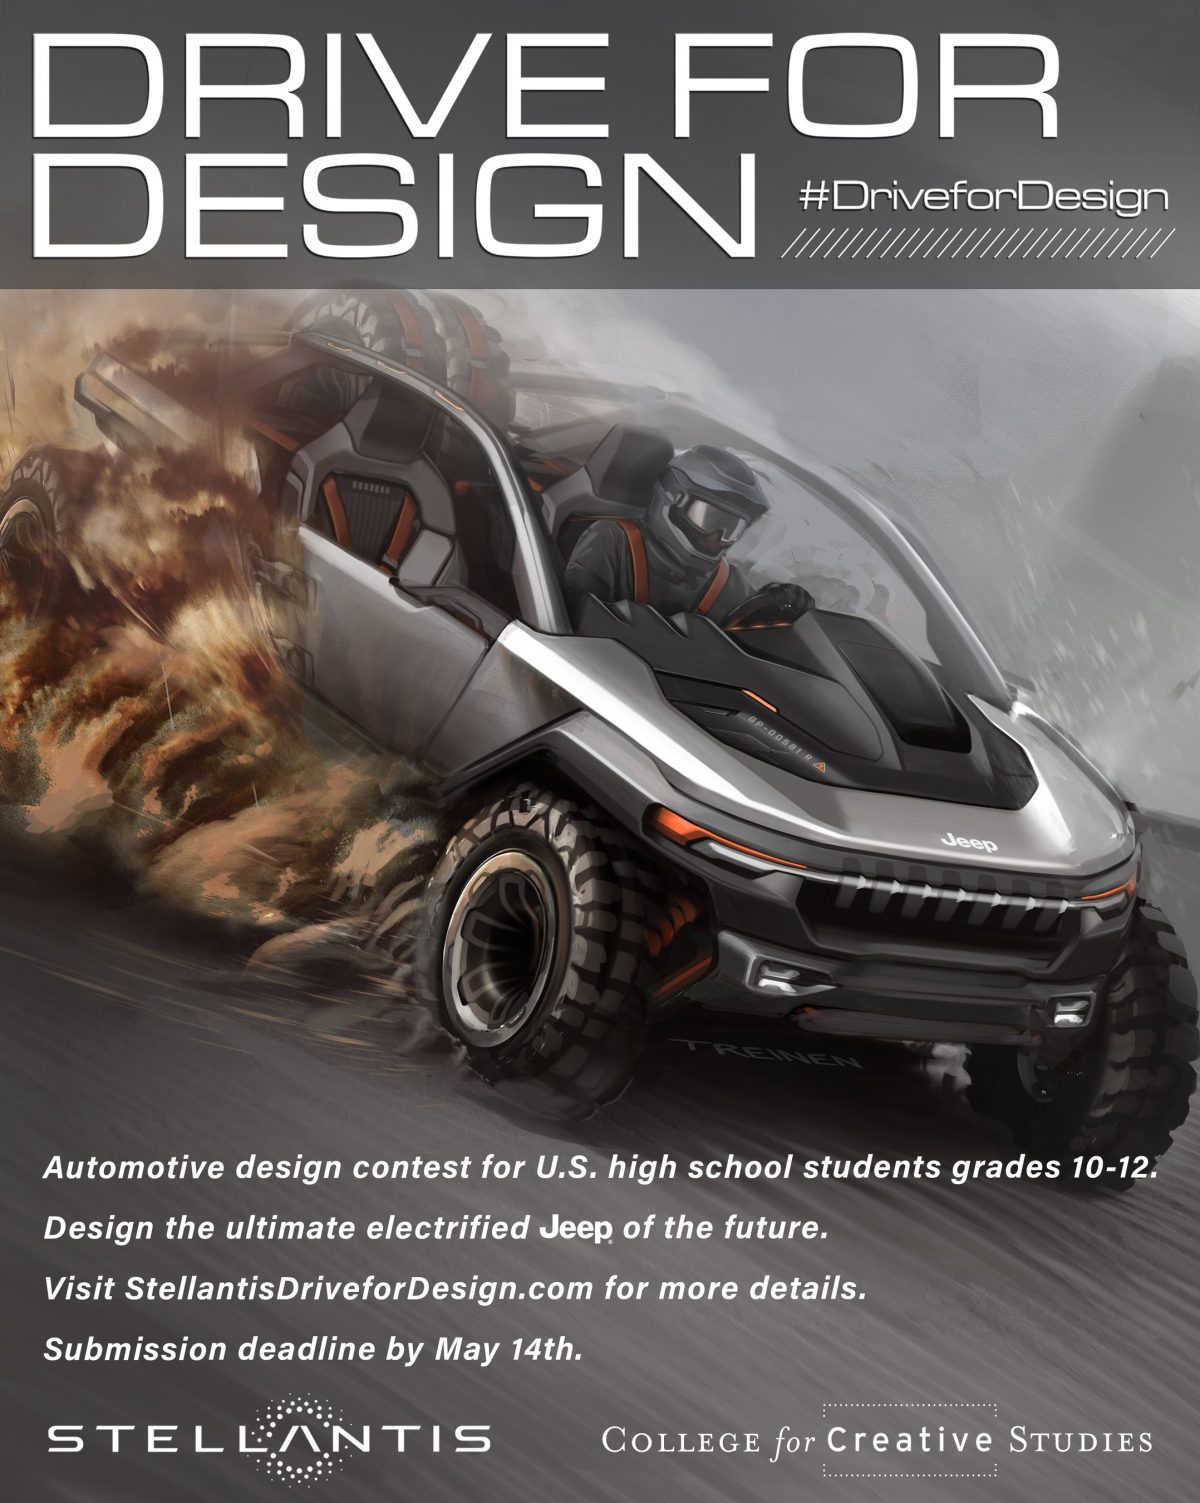 Ninth Annual Drive for Design Contest Challenges Students to Sketch Electrified Jeep® of the Future